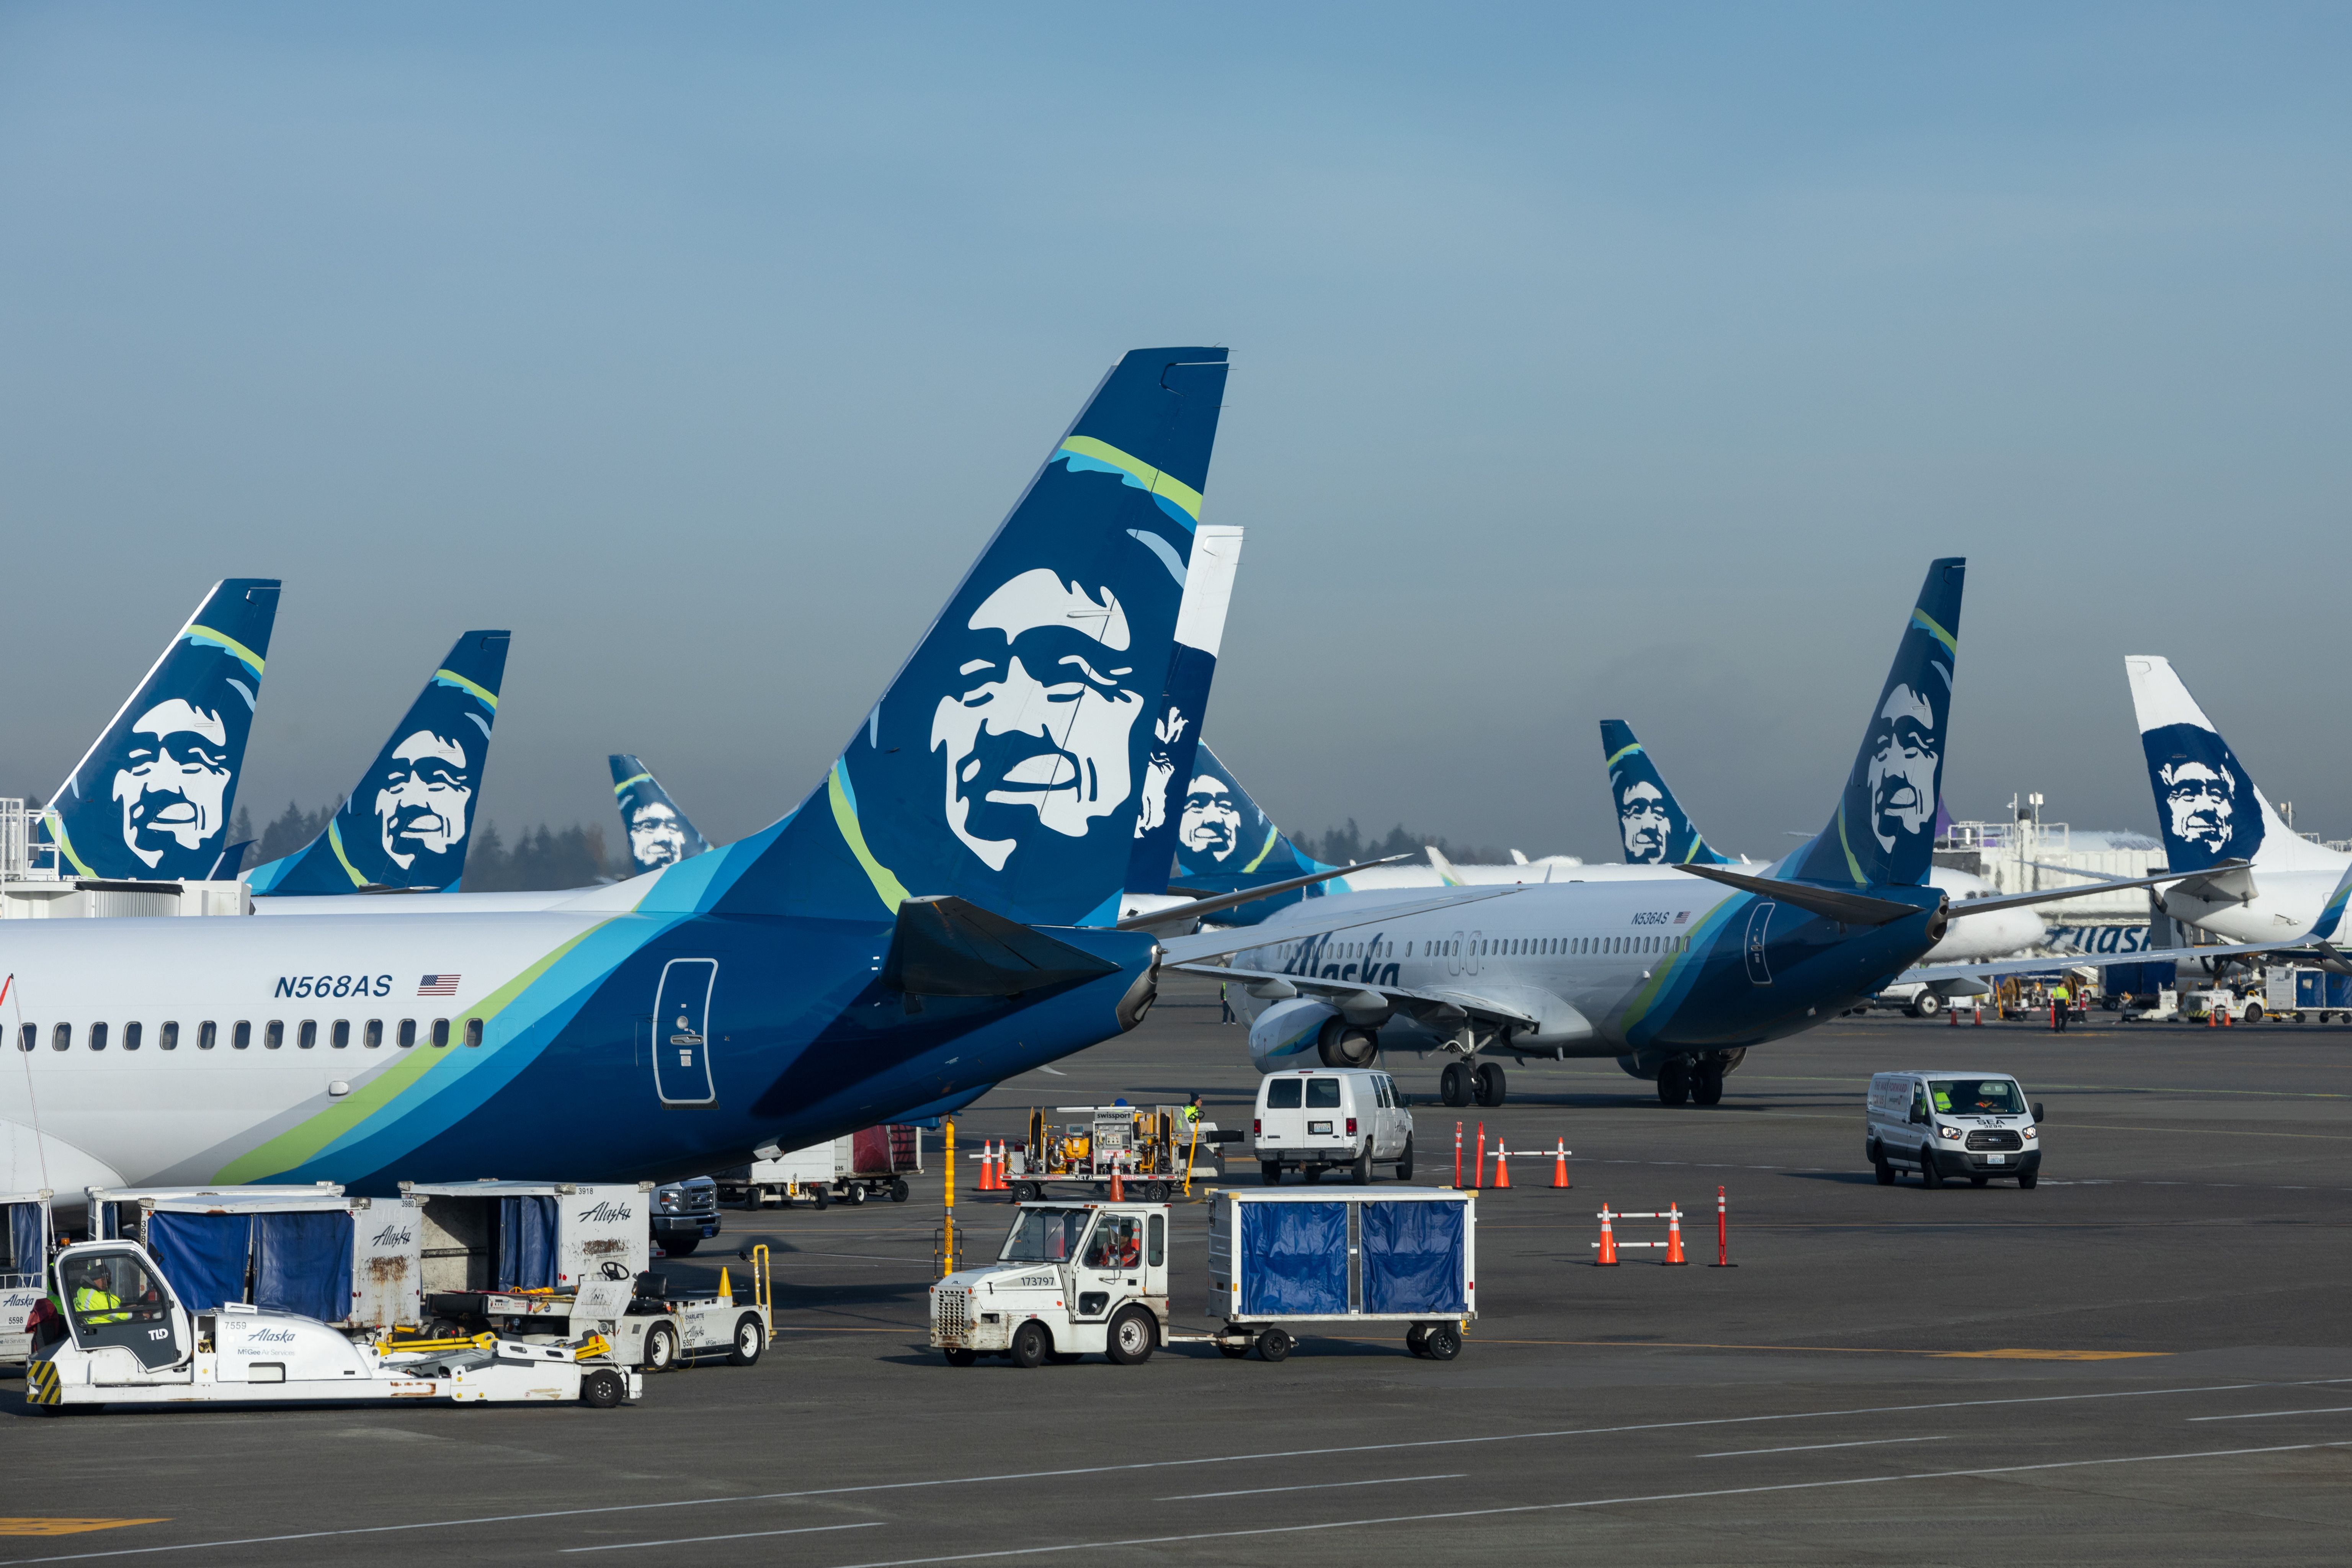 Several Alaska Airlines aircraft on the apron at Seattle Tacoma International Airprot.